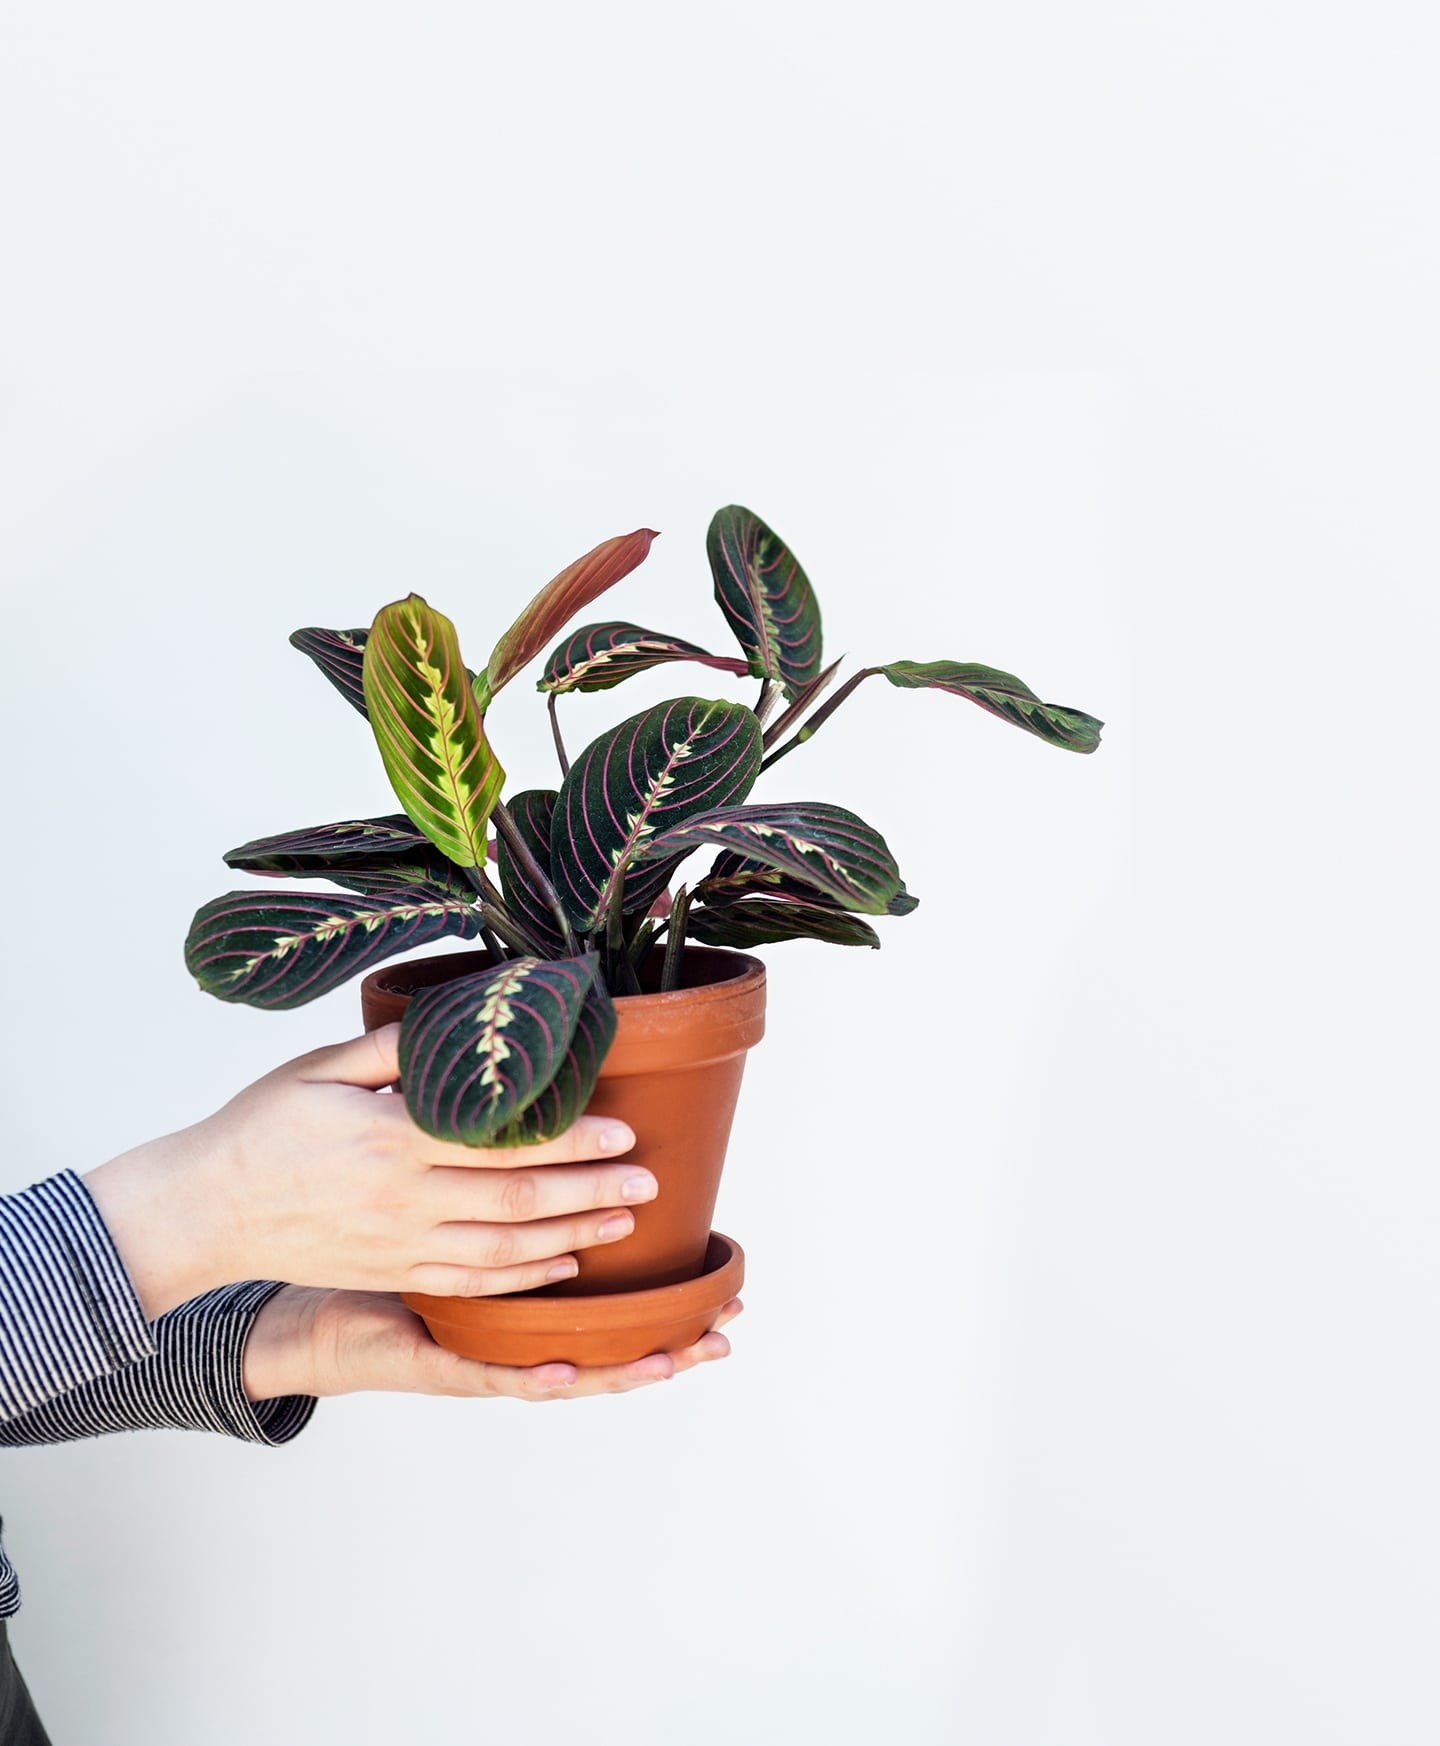 18 Of The Best Places To Buy Houseplants Online